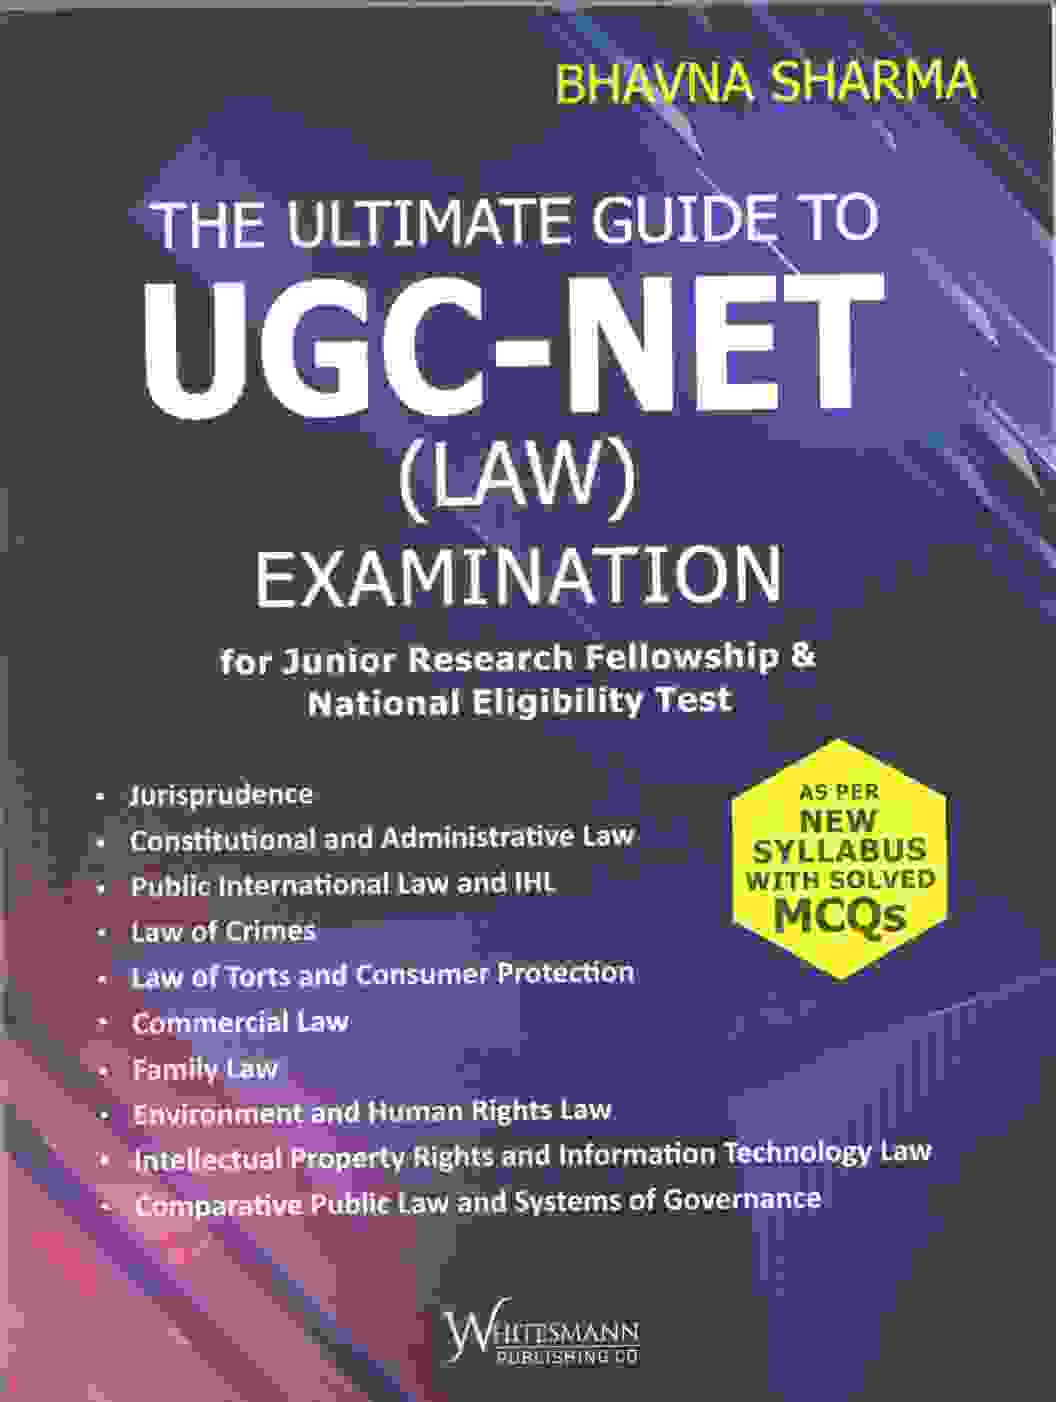 The-Ultimate-Guide-to-UGC-NET-(LAW)-Examination-for-junior-Research-Fellowship-&-National-Eligibilit